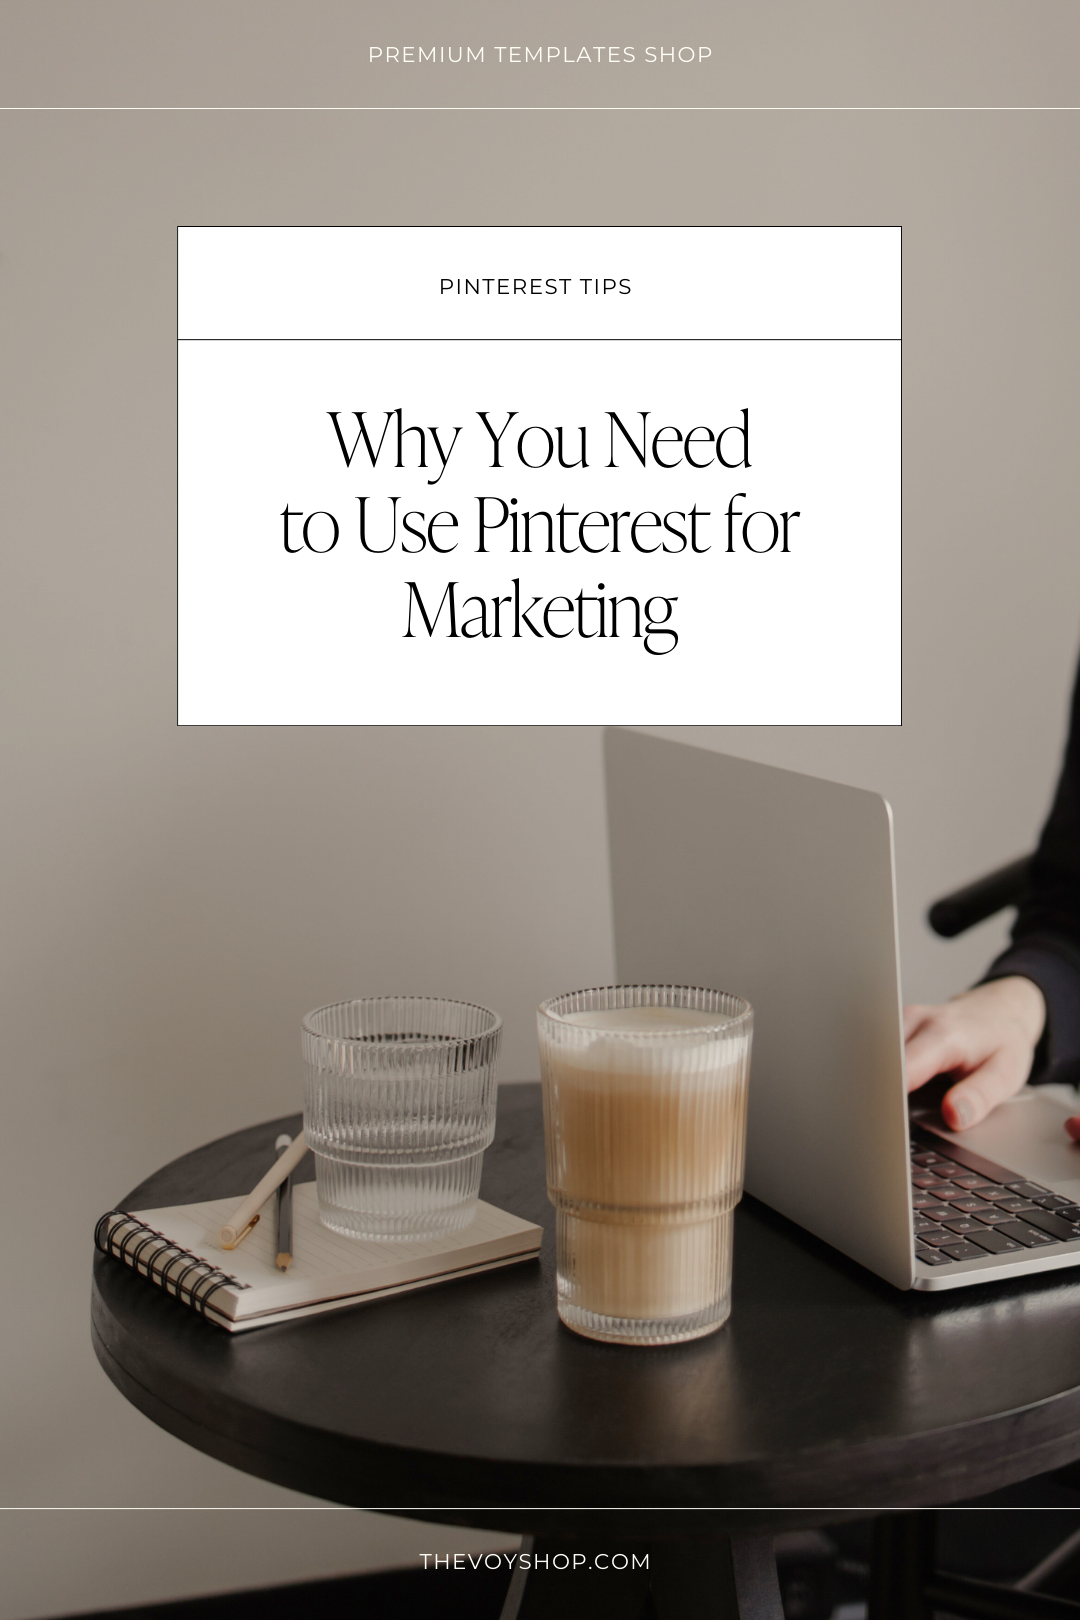 5 Reasons Why You Need to Use Pinterest for Marketing